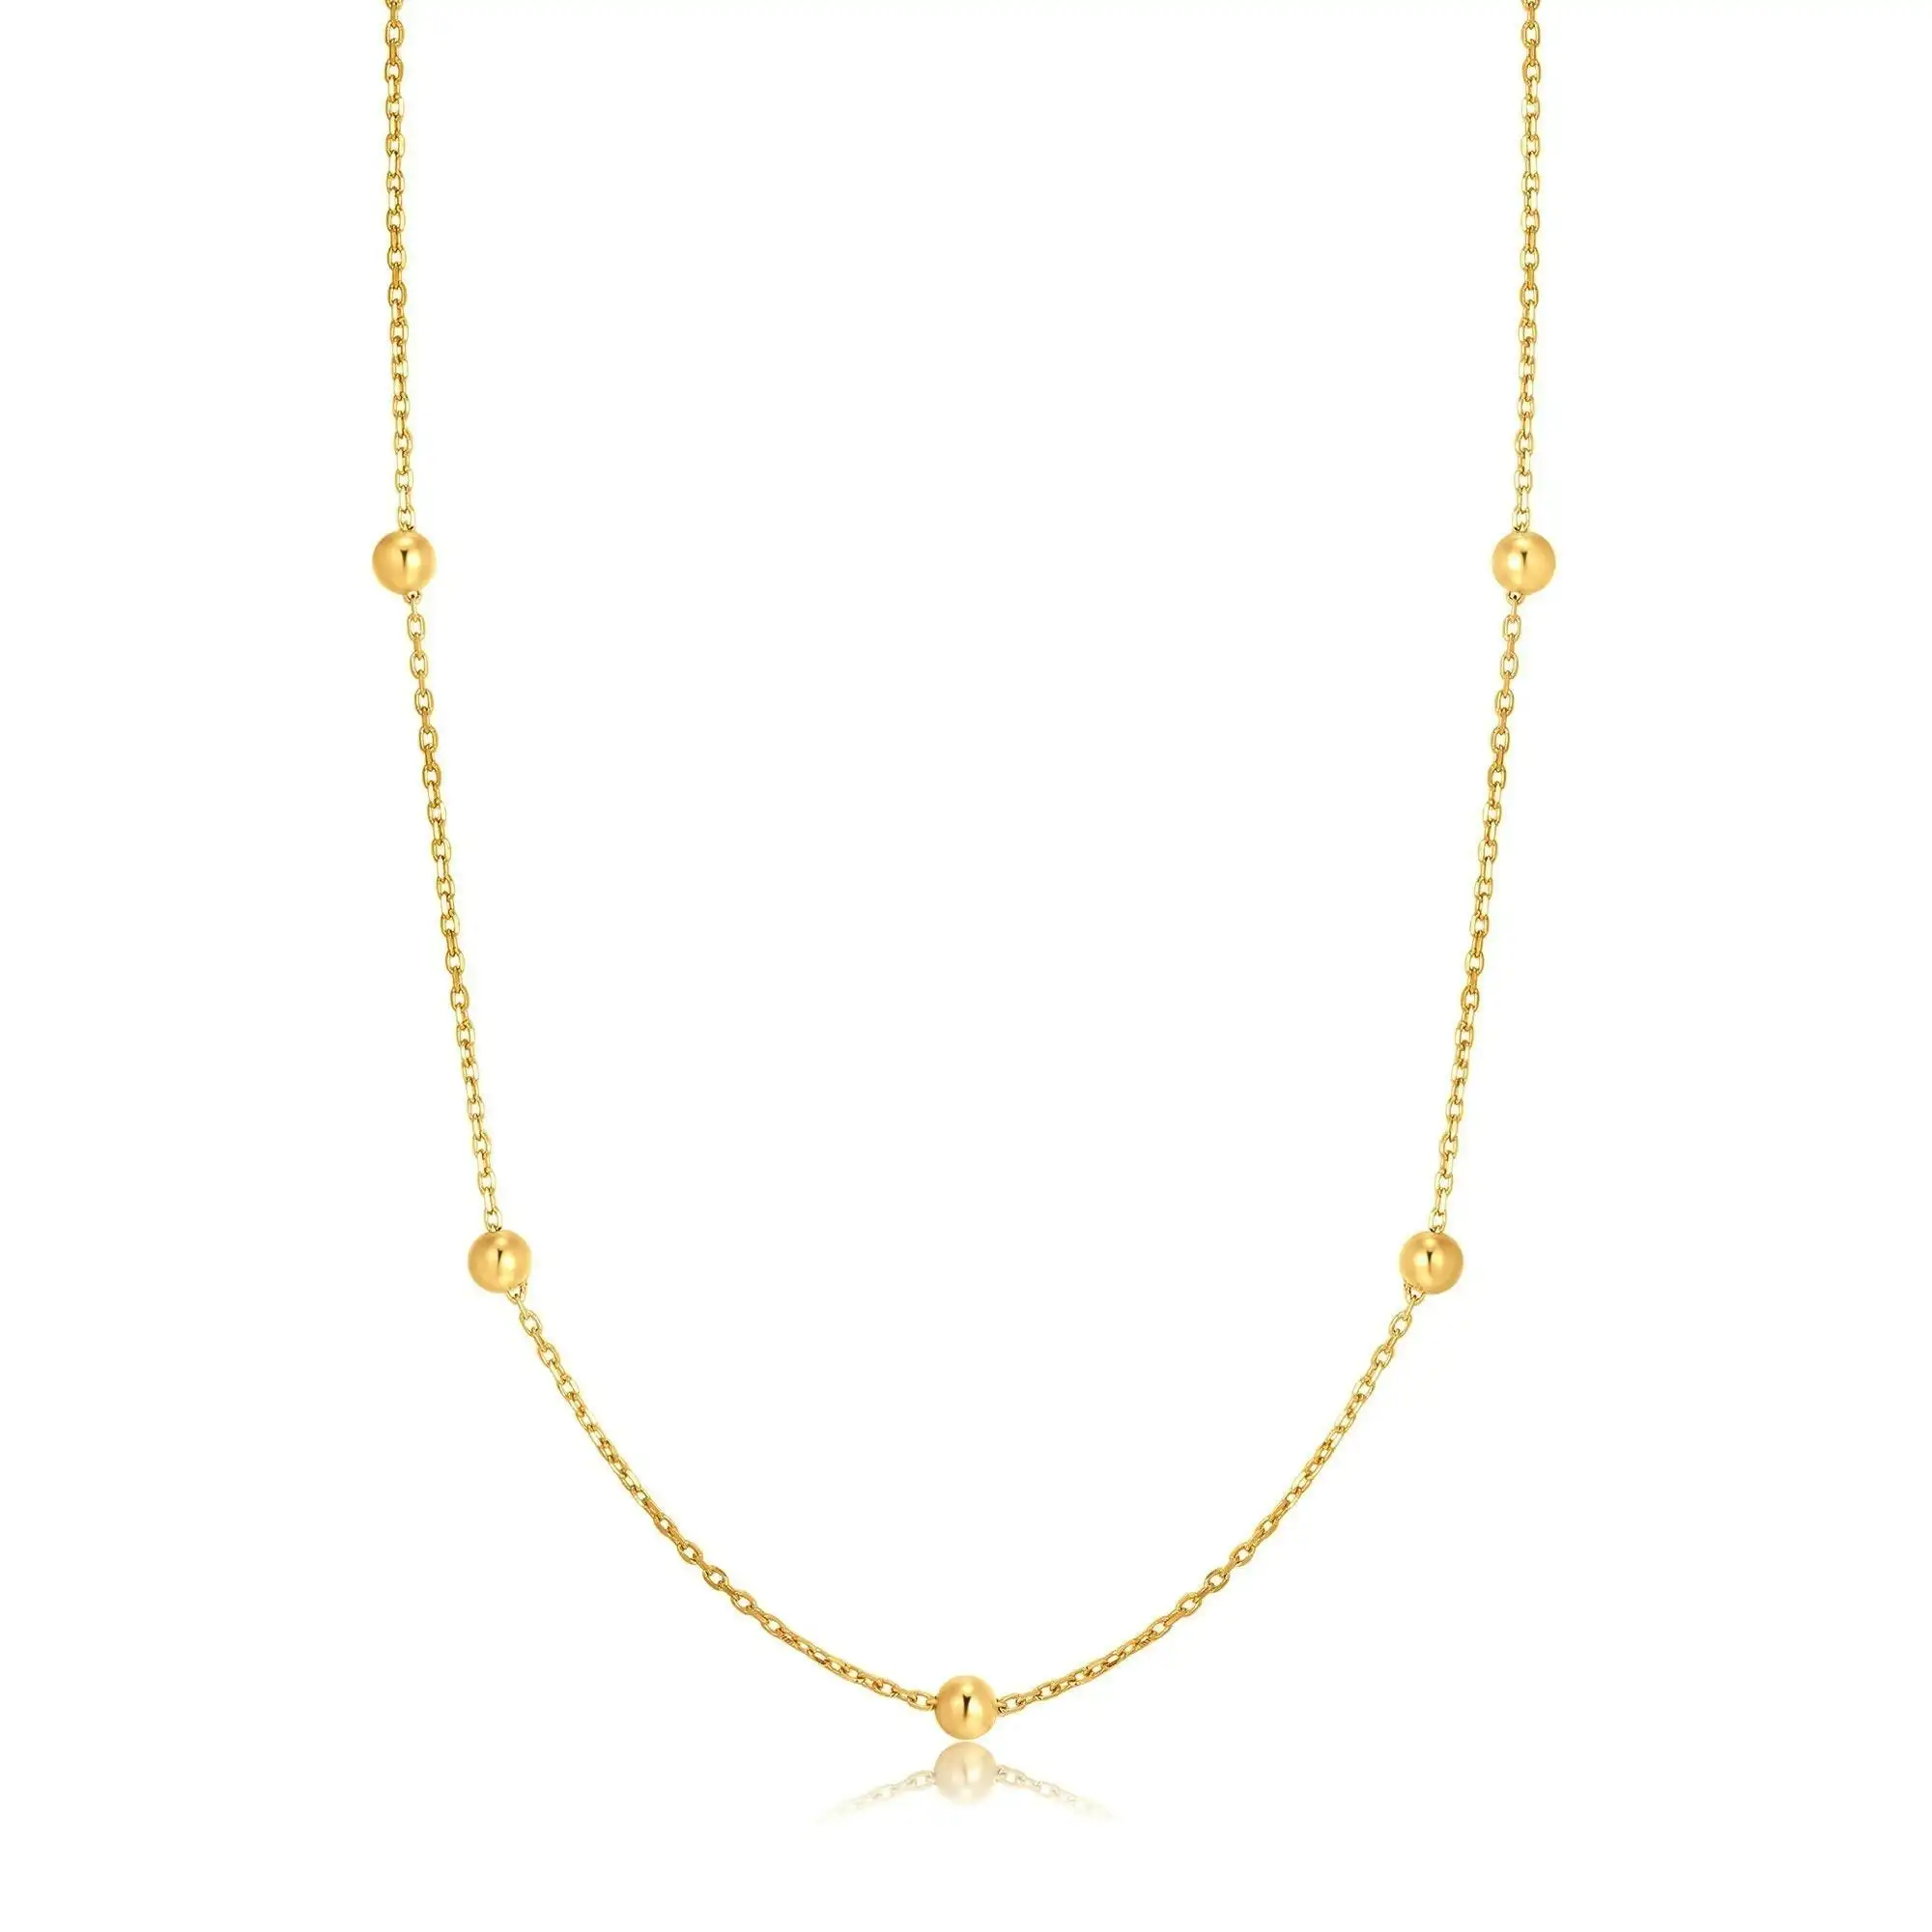 Ania Haie 14kt Gold Beaded Necklace